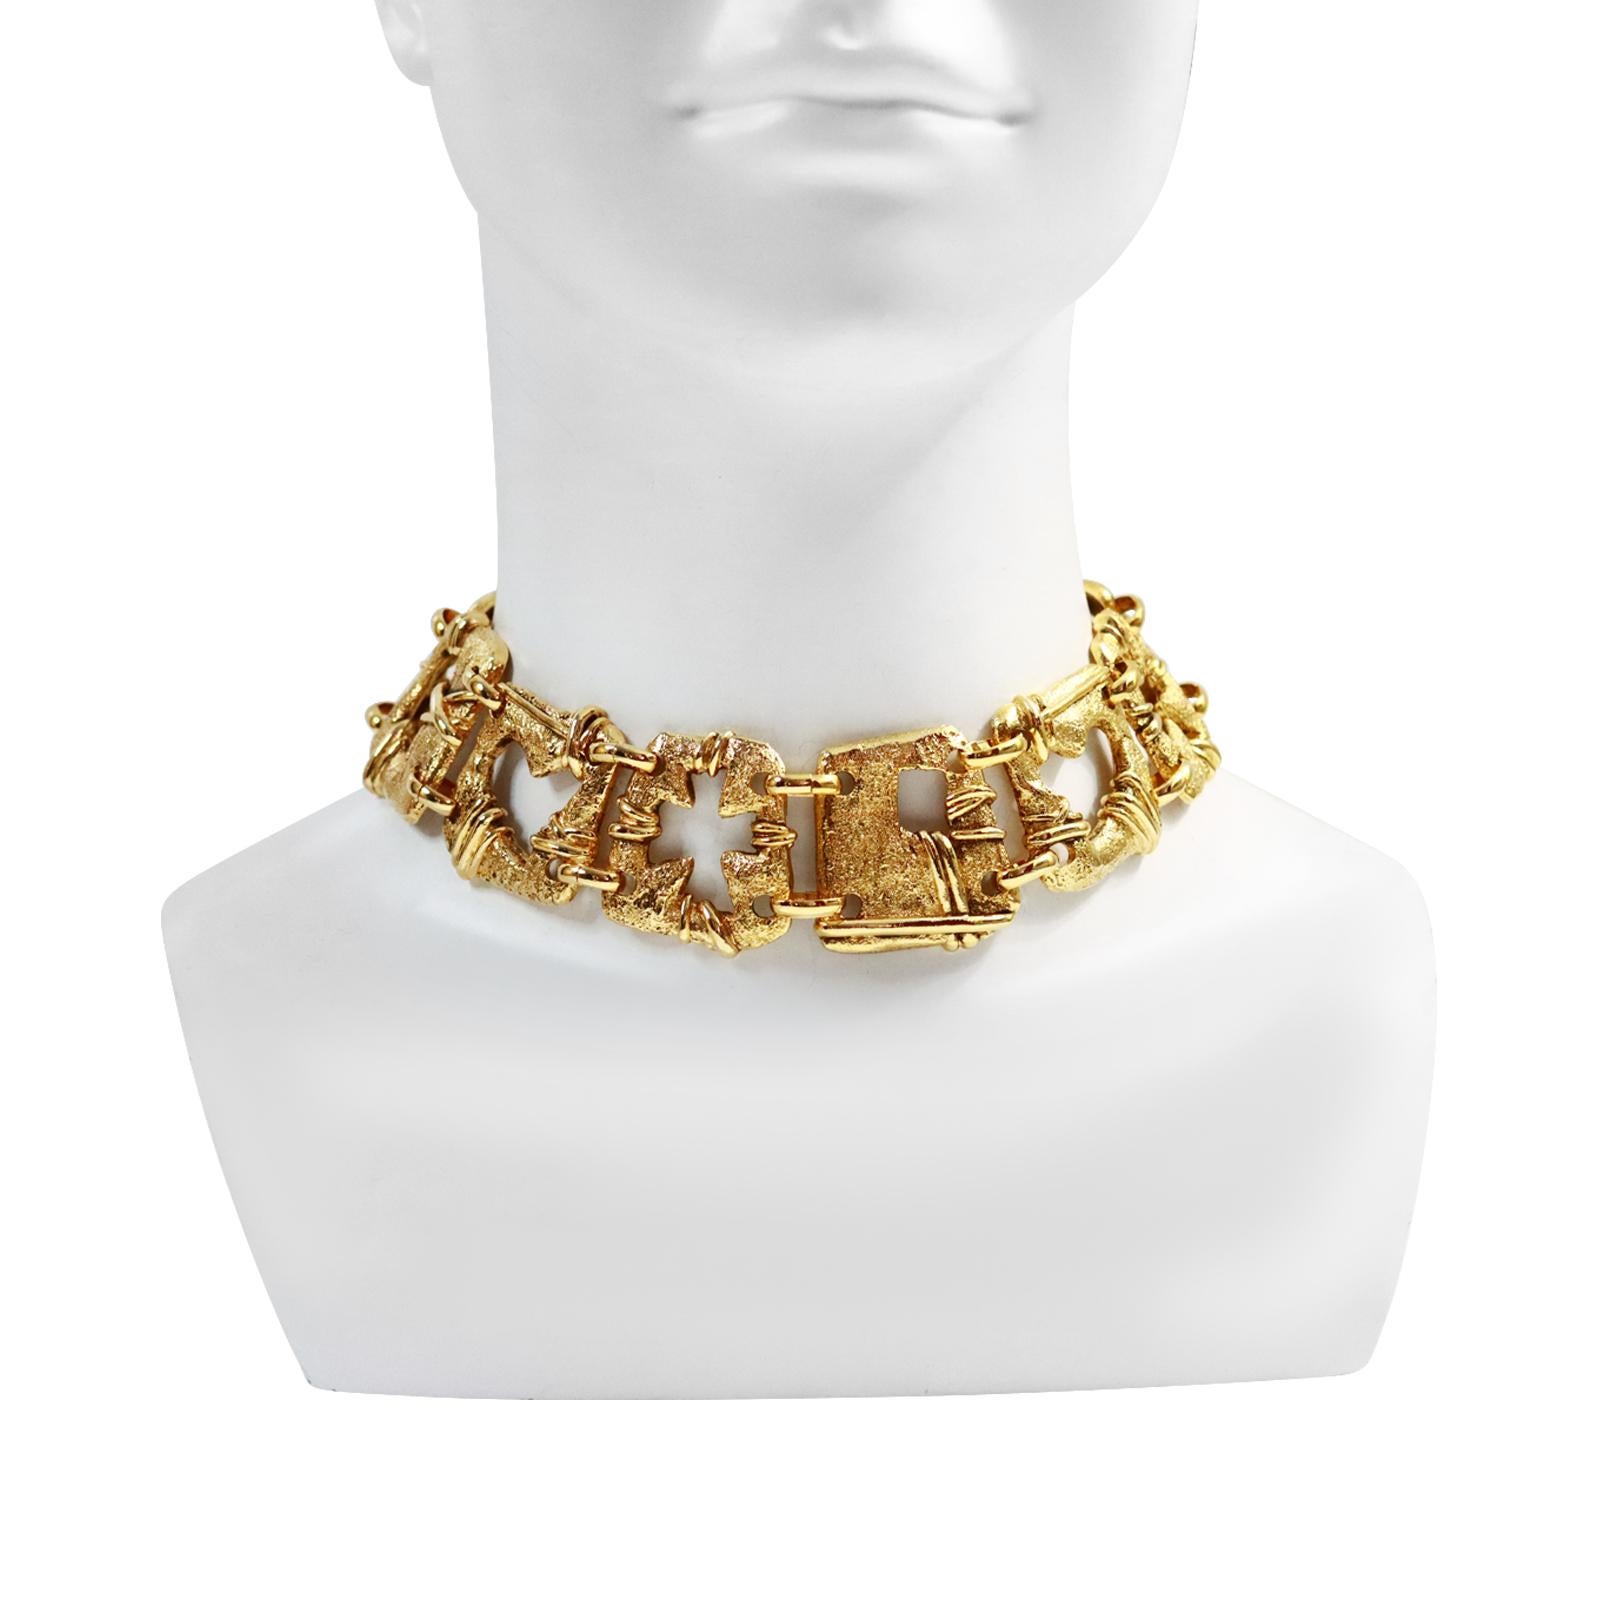 Artist Vintage Christian Lacroix Gold Choker with Various Square Designs Circa 1990s